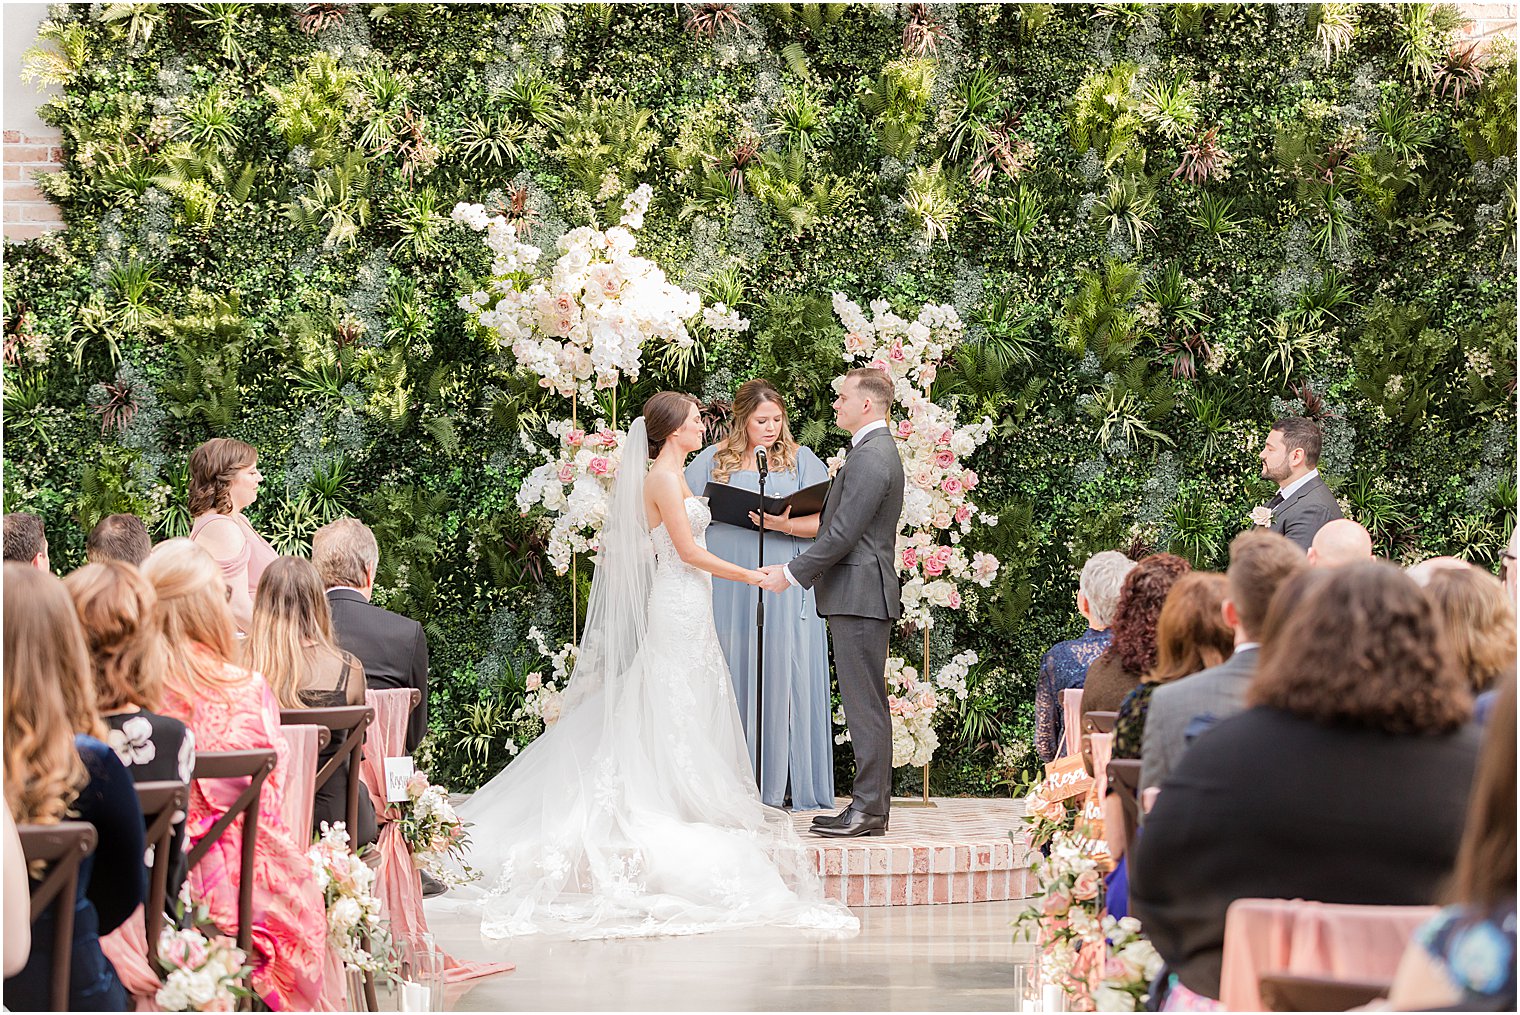 couple exchanges vows during outdoor wedding ceremony in courtyard